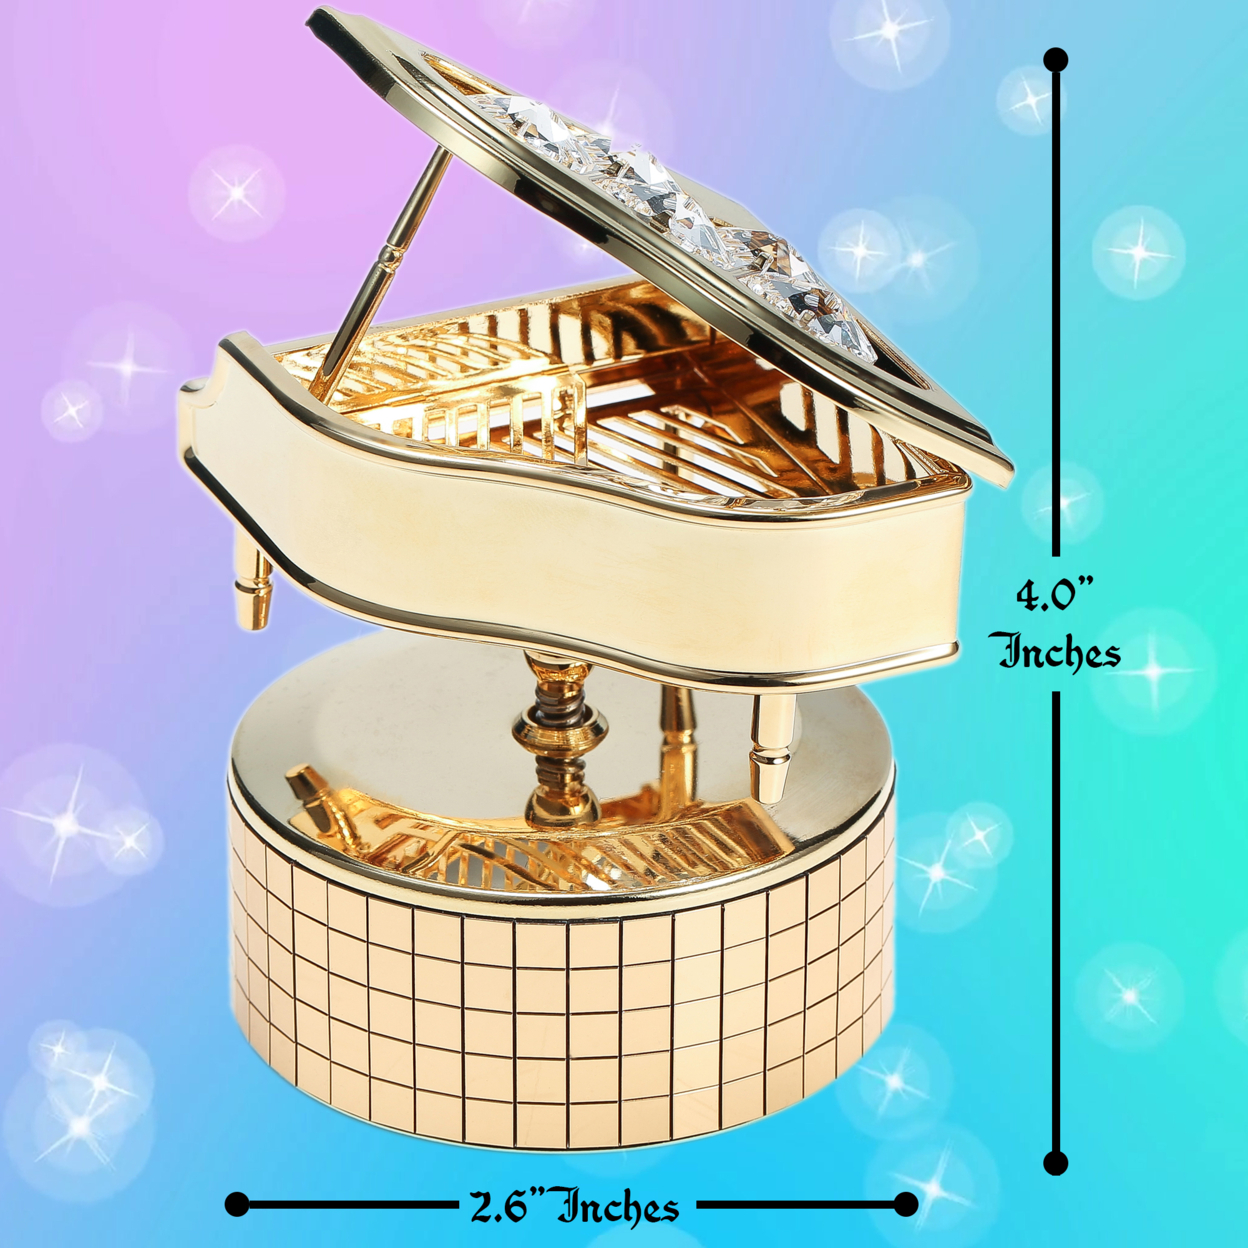 24K Gold Plated Wind Up Music Box With Crystal Studded Grand Piano Figurine By Matashi